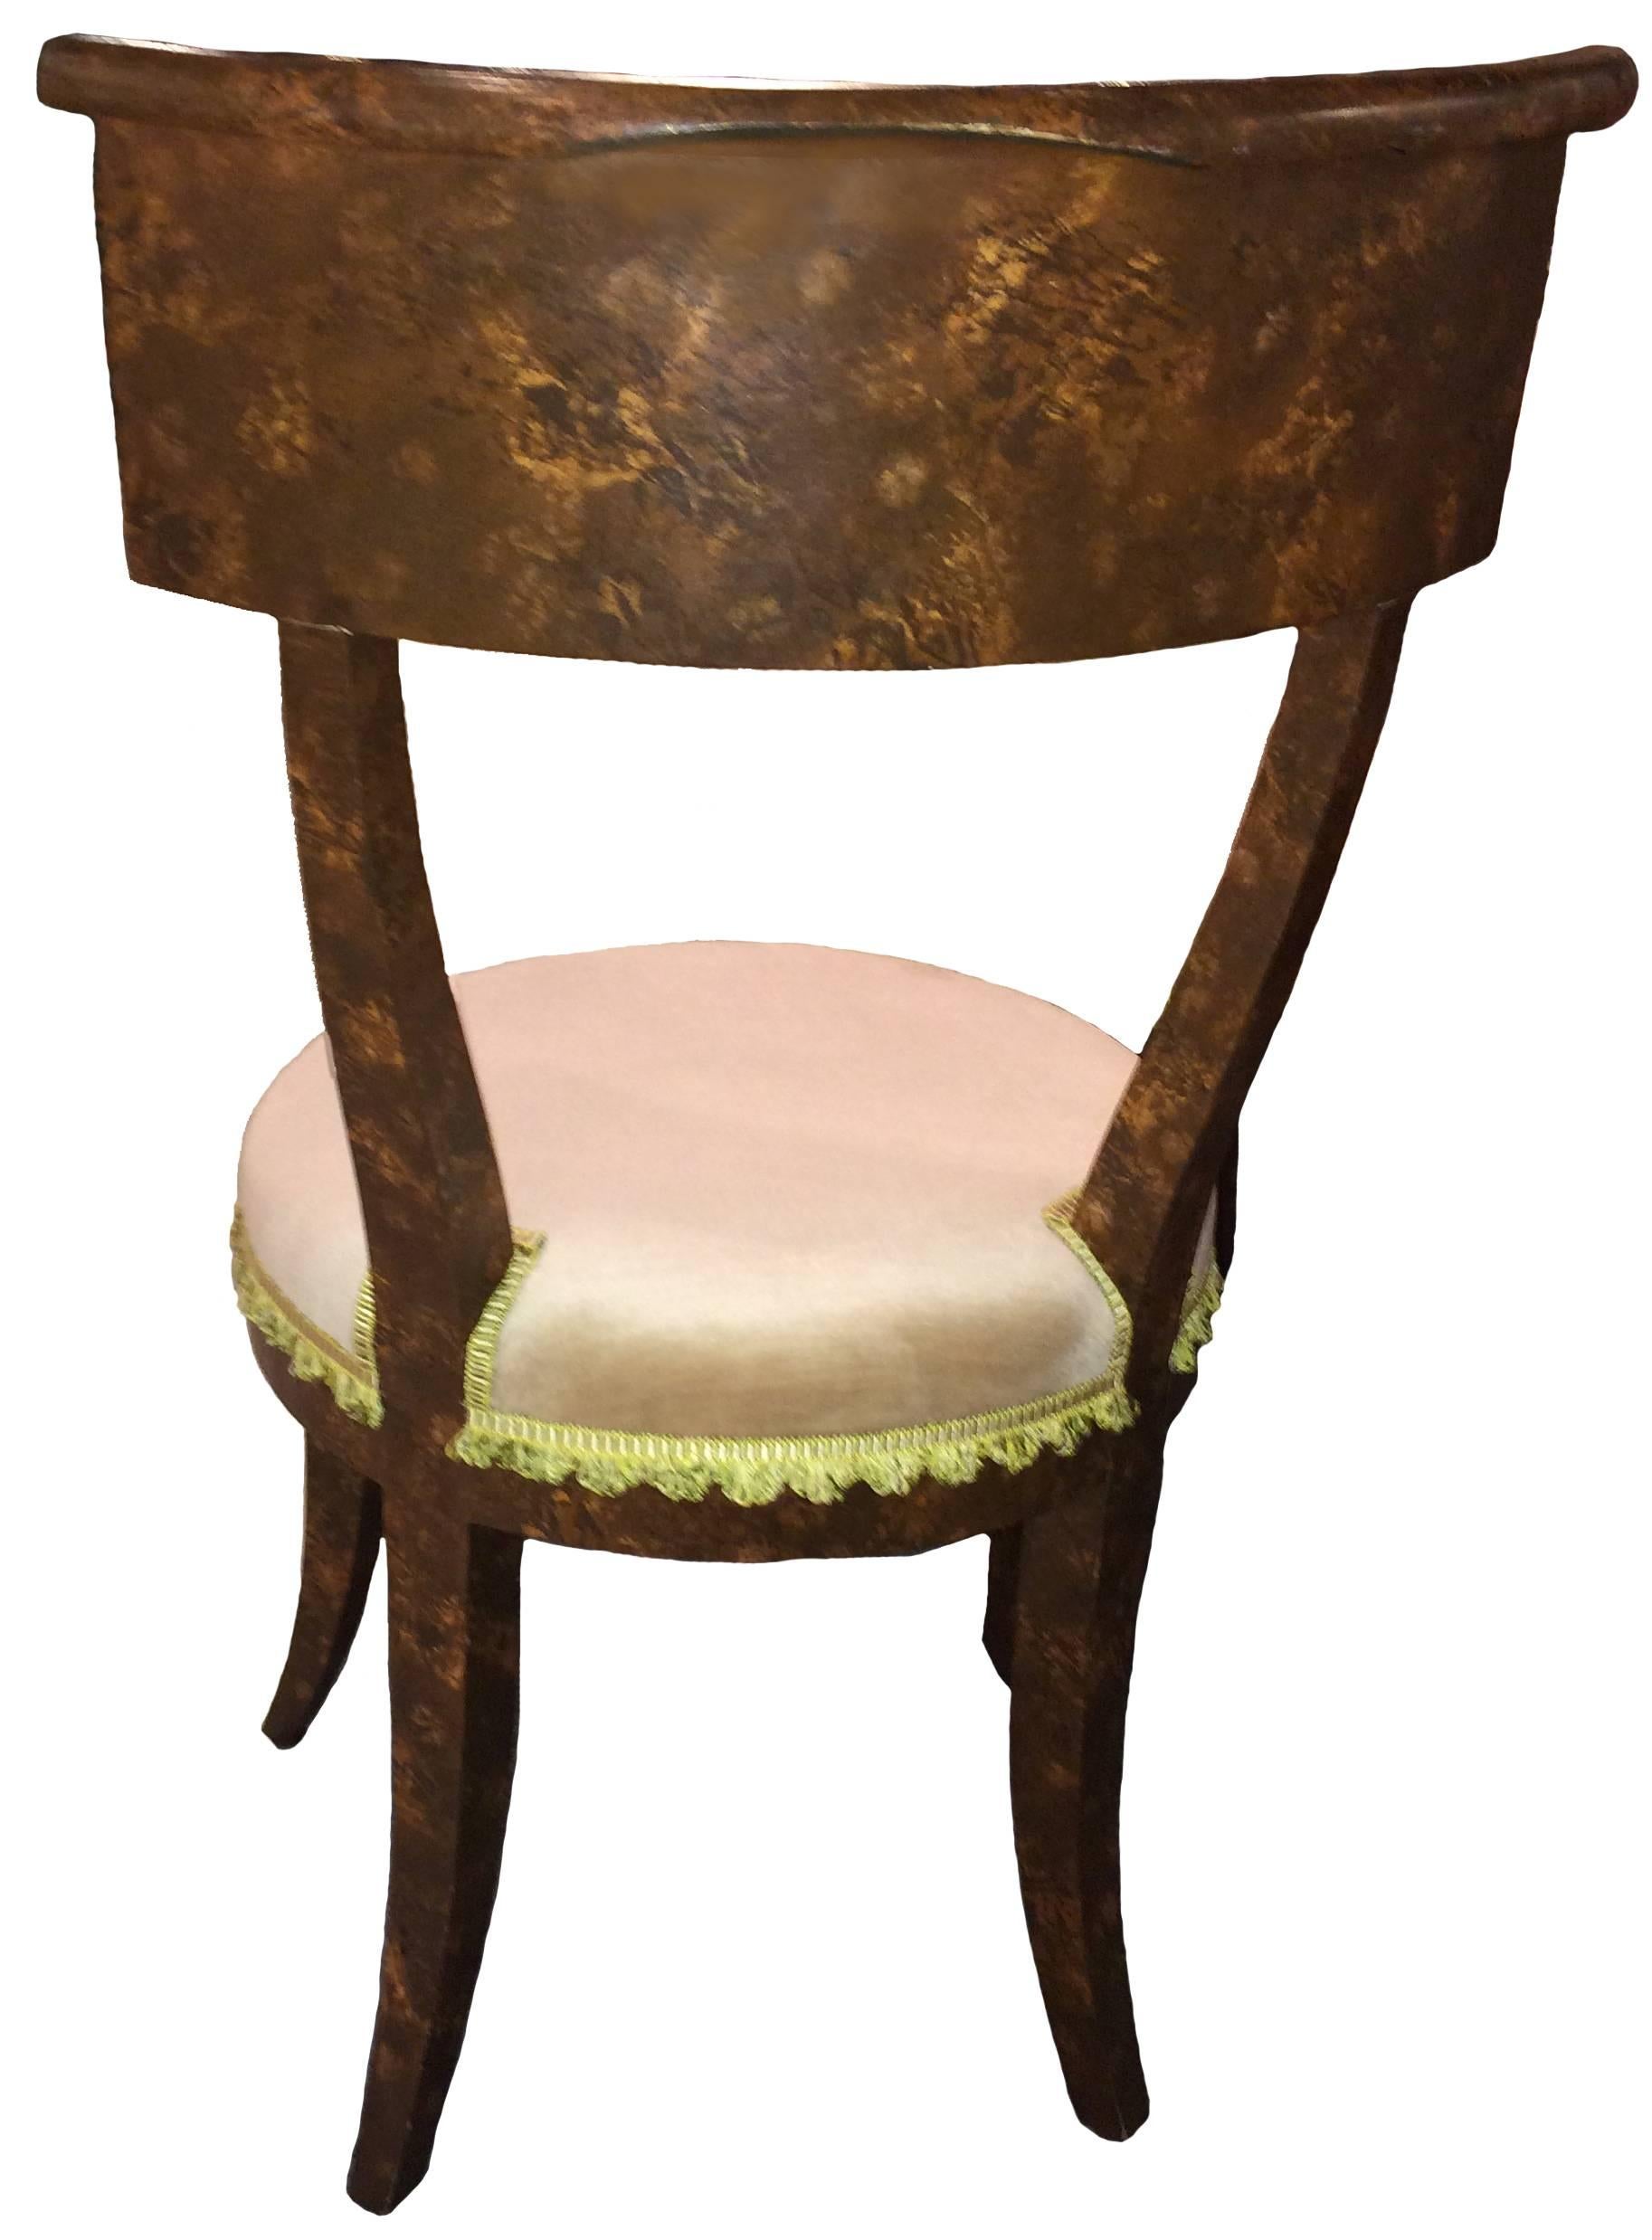 Velvet SALE Klismos Style Faux-Tortoise Painted Chinoiserie Chairs, Pair